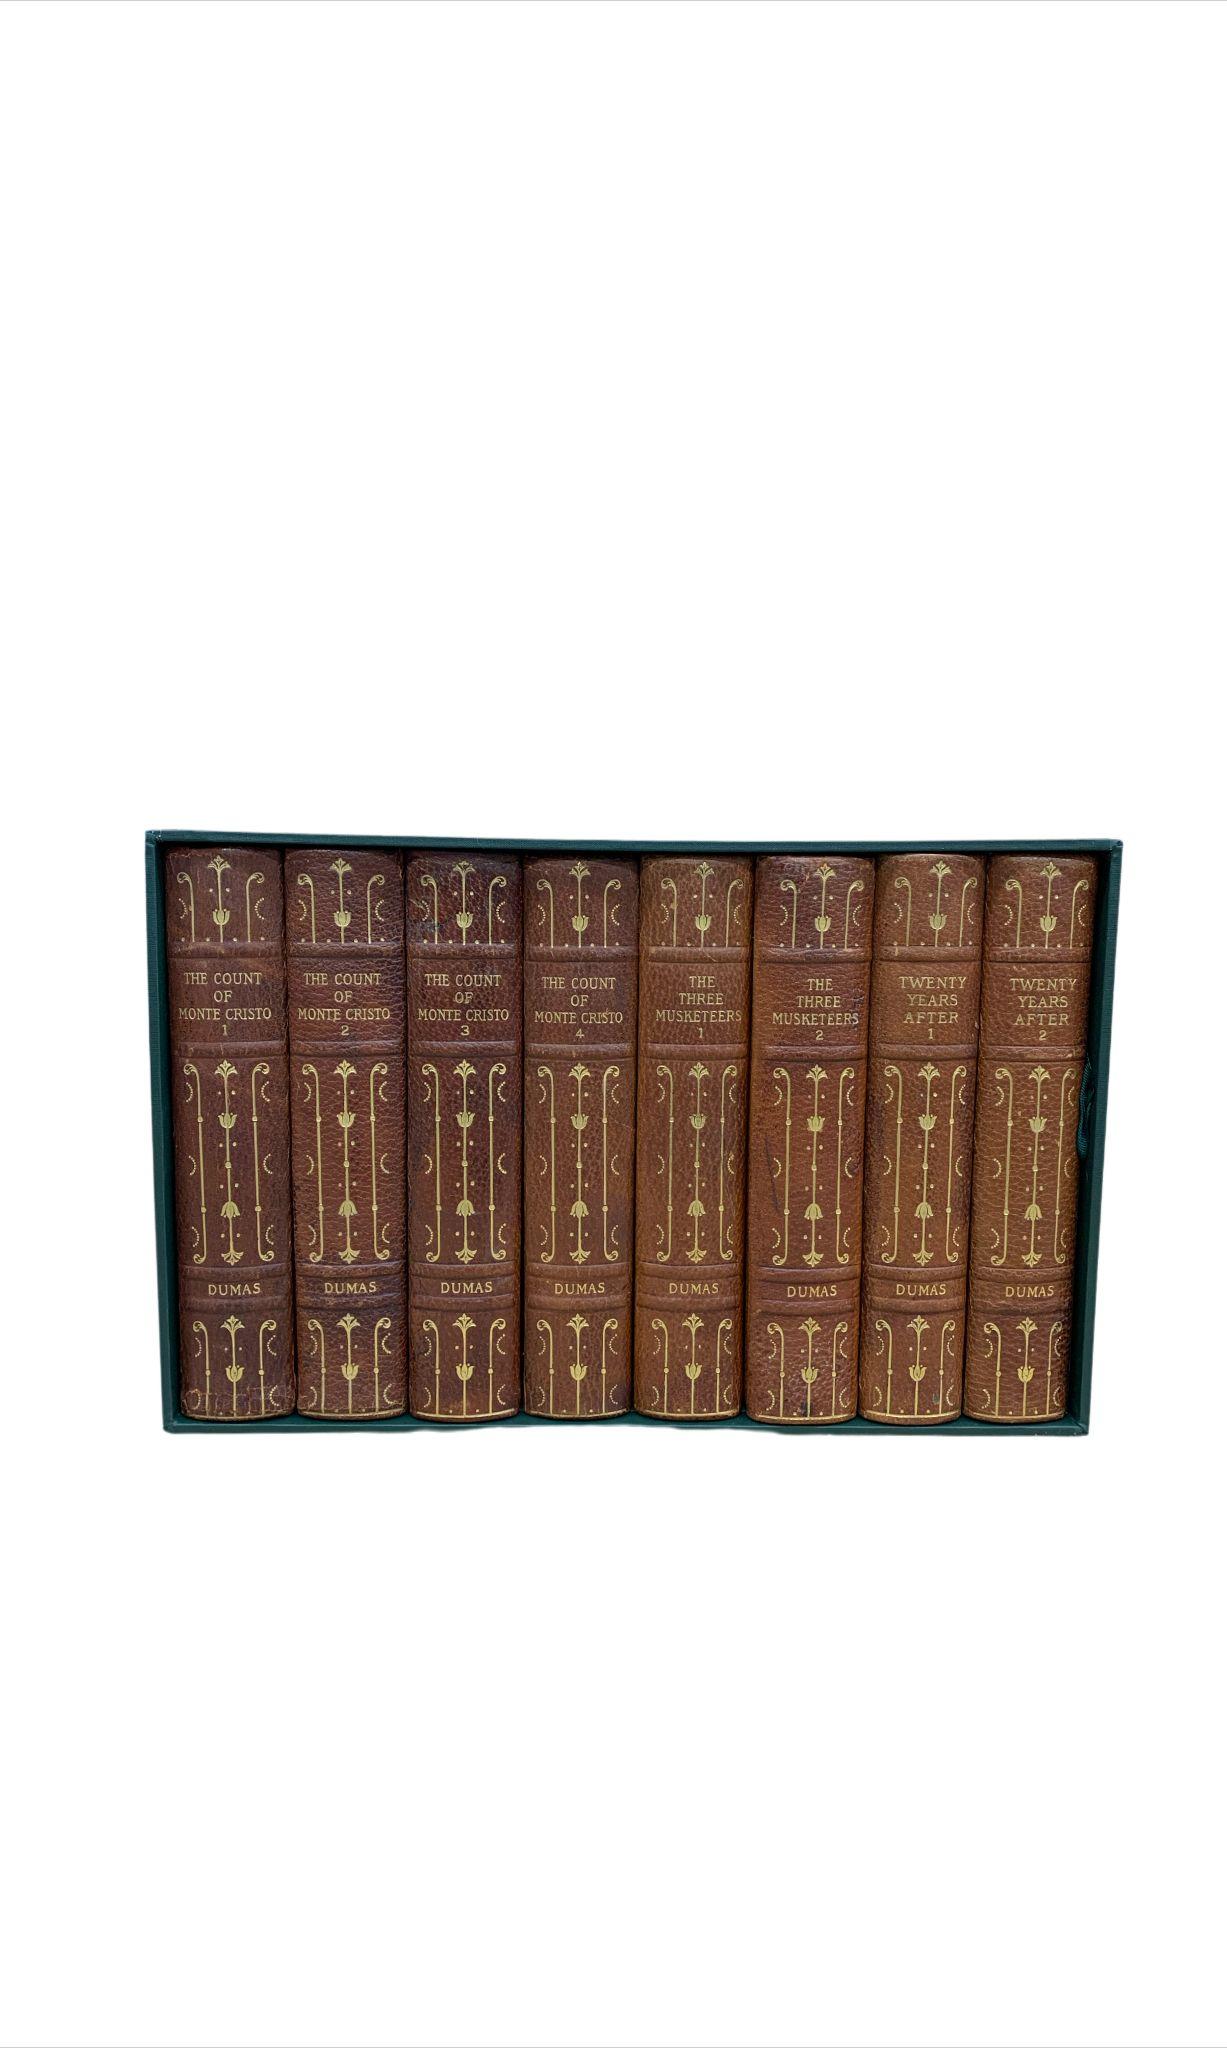 Late 19th Century Works of Alexandre Dumas with Author's Handwritten and Signed Note, 8-Vols